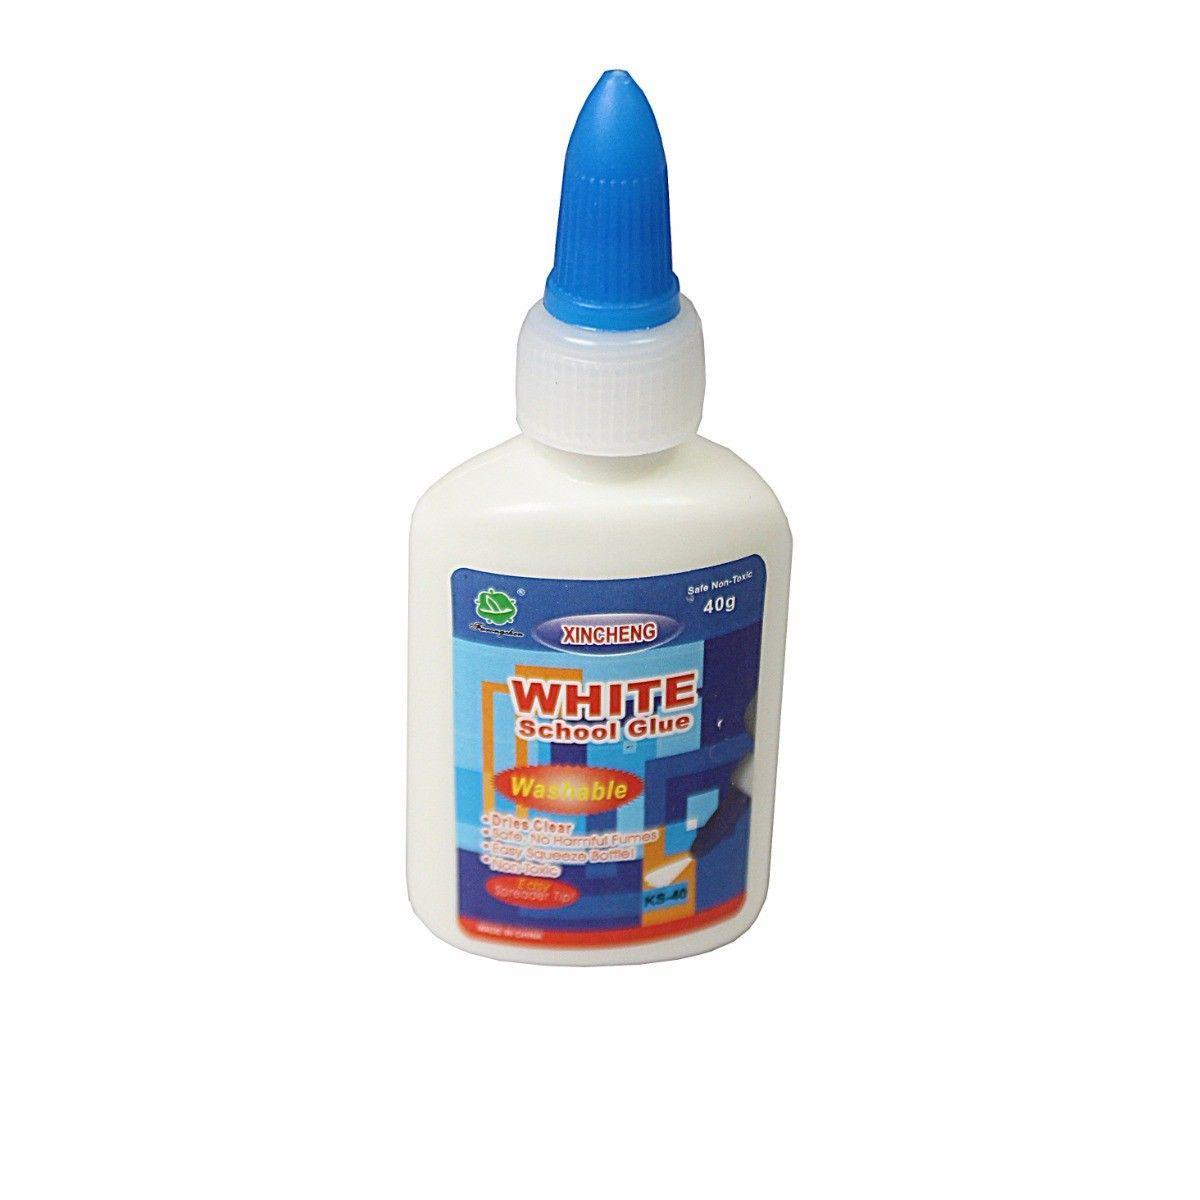 3 Pack Glue Stick x 2 With x 1 White School Glue 2840 (Parcel Rate)